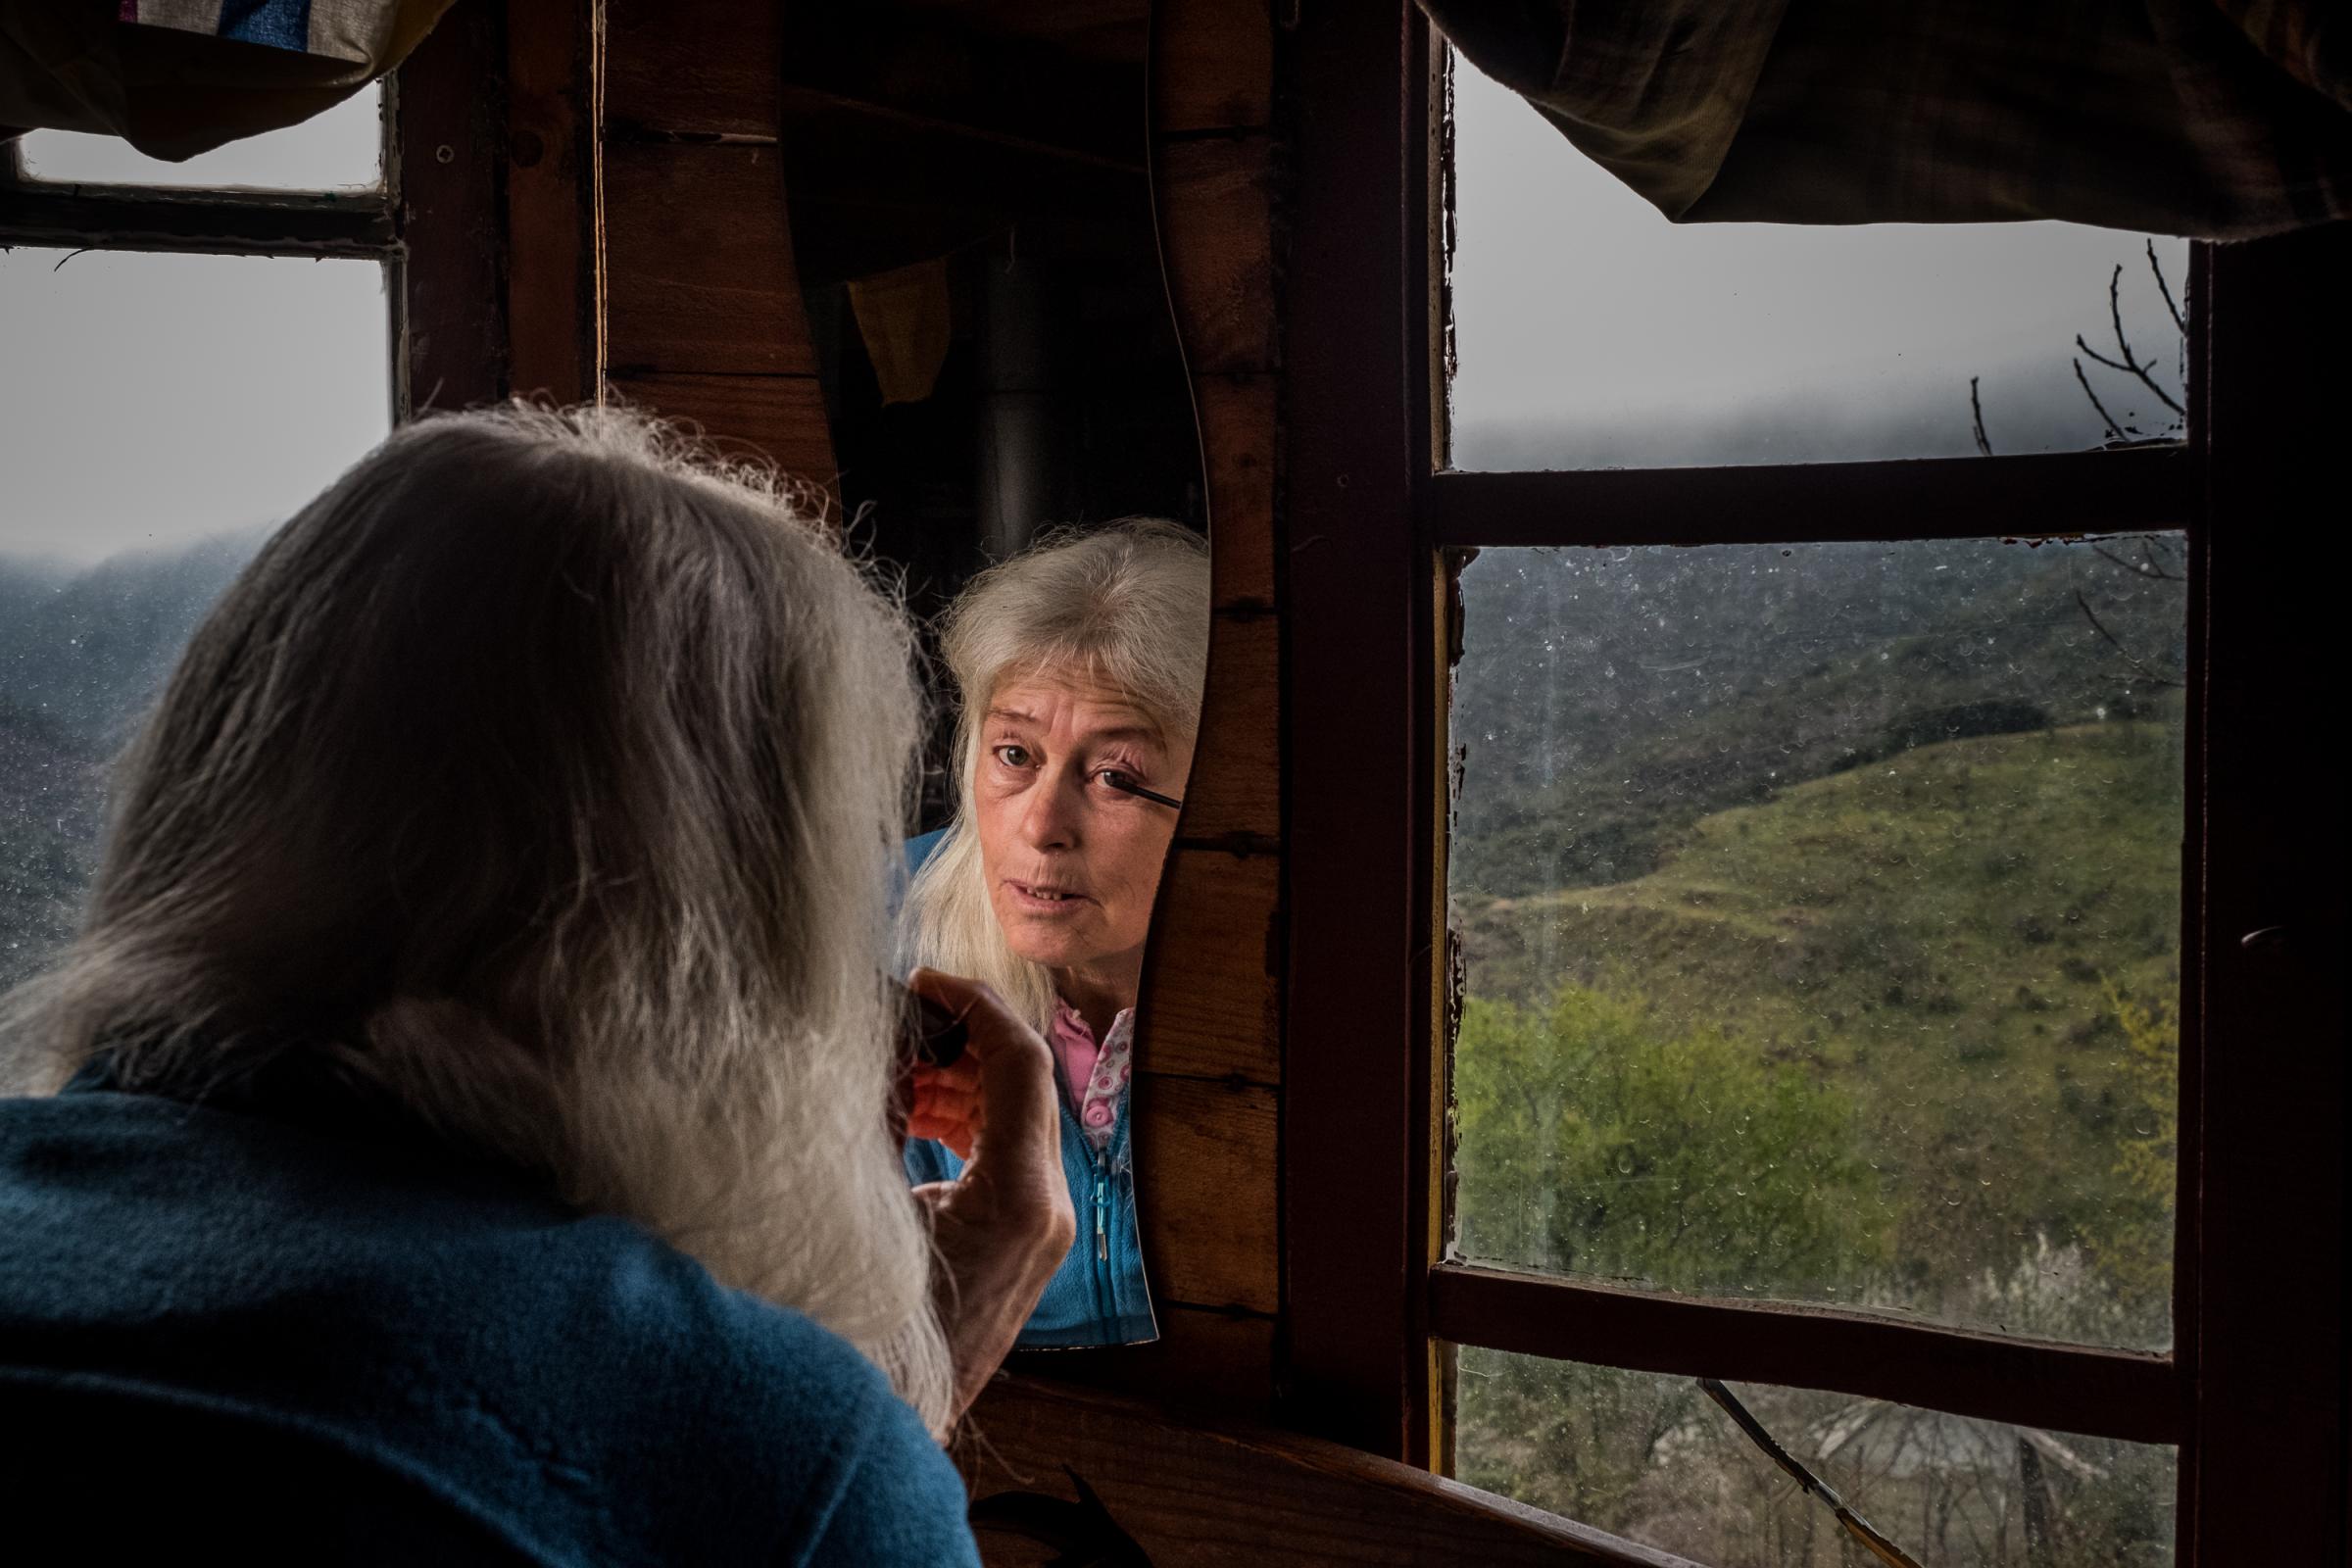 Hannah Br&uuml;derer brings on make-up in a wooden yurt in Matavenero, Spain. Matavenero is one of Spain&#39;s oldest repopulated villages, founded in the seventies by a group of German hippies. 50 years later, there are still 50 residents in the off-grid village, that only can be reached by foot. Hannah is among the founders of the village. Part of the project Rutopia, on the repopulation of abandoned villages in rural Spain, funded by the National Geographic Society. Matavenero, 3-4-2021